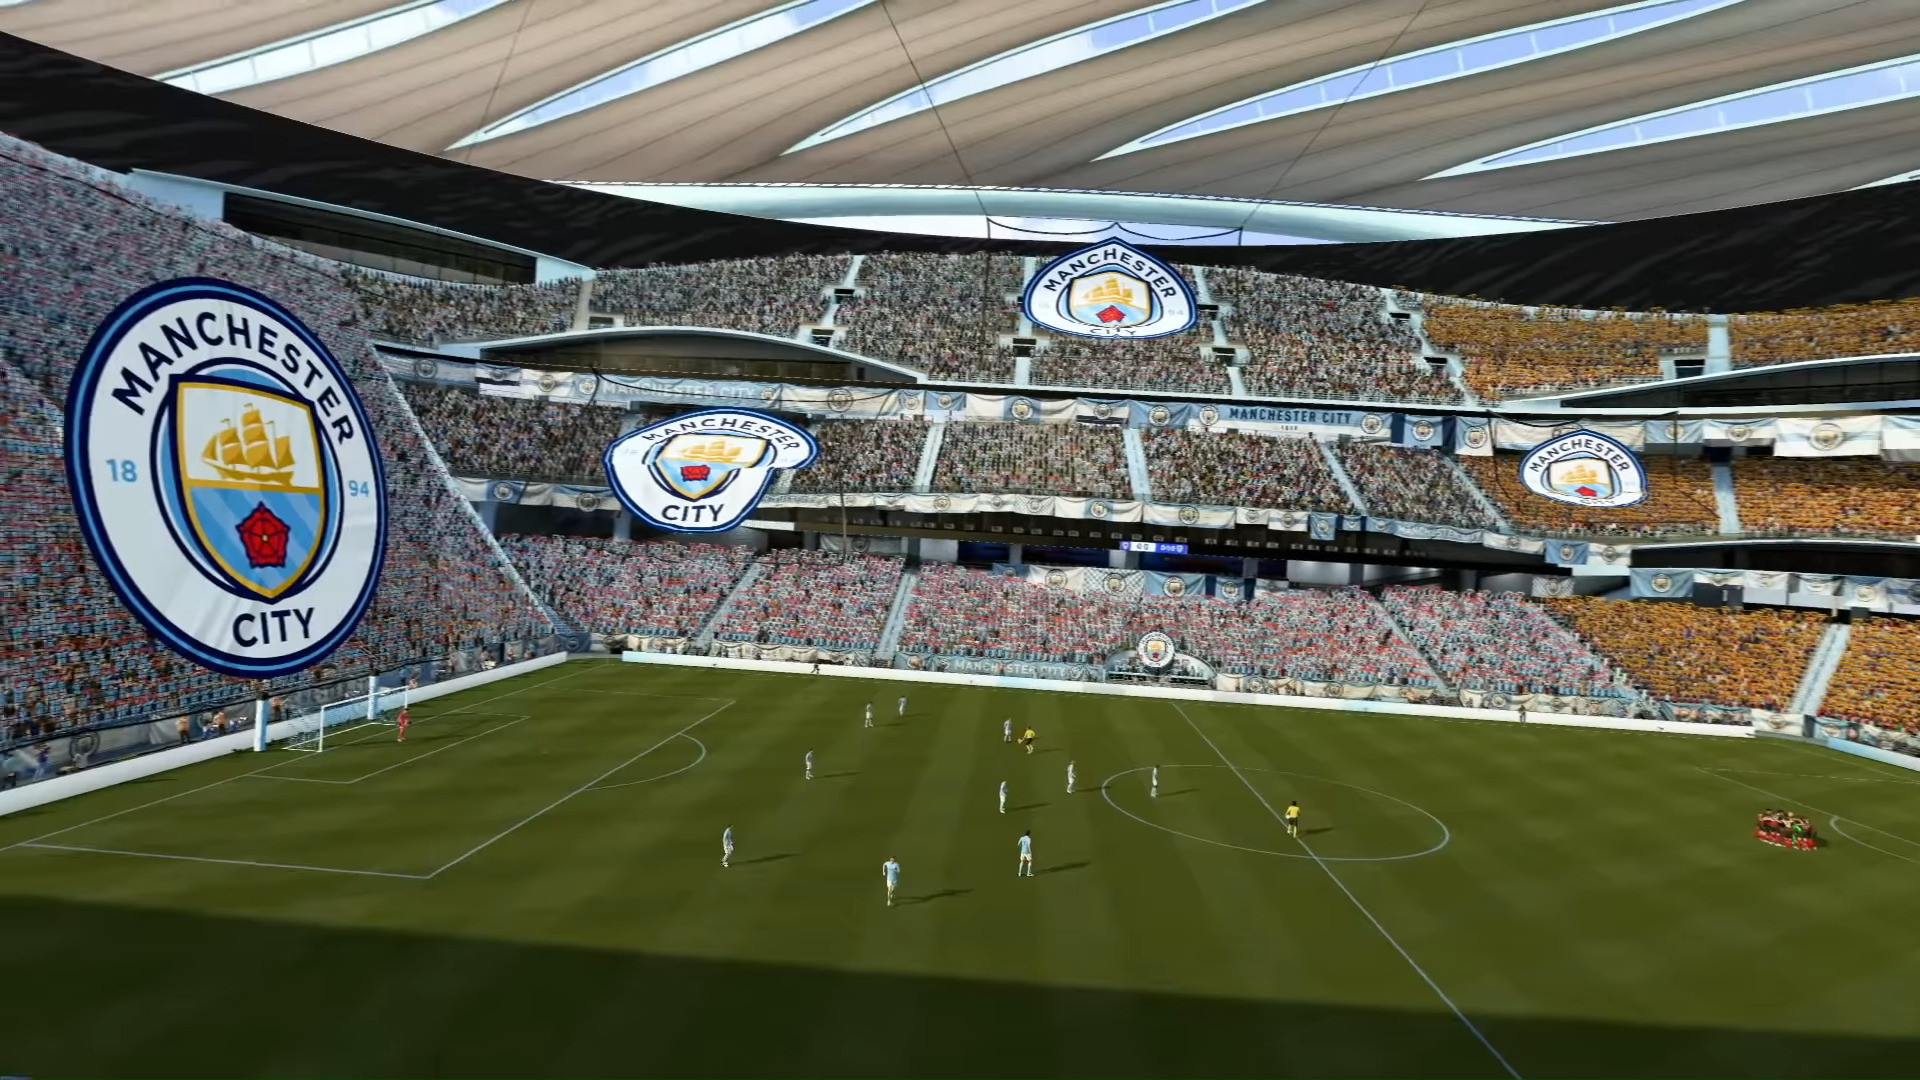 FIFA 21 Ultimate Team Gameplay Teasers Are Now Live, Has Anything Changed?